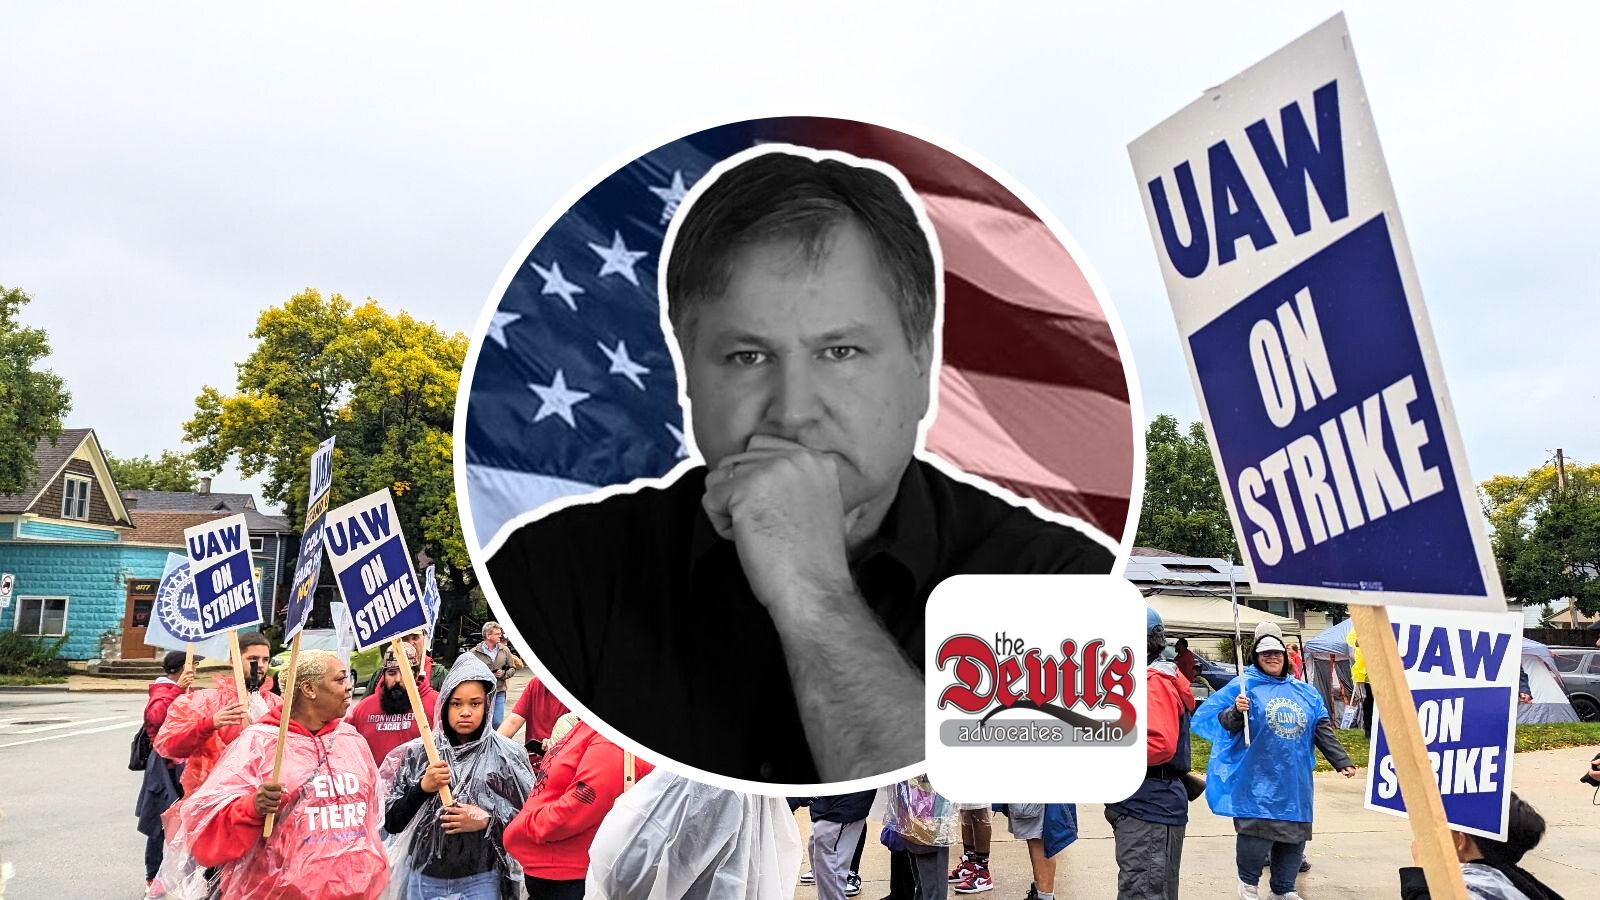 The UAW Strike: A Turning Point for Wisconsin Workers